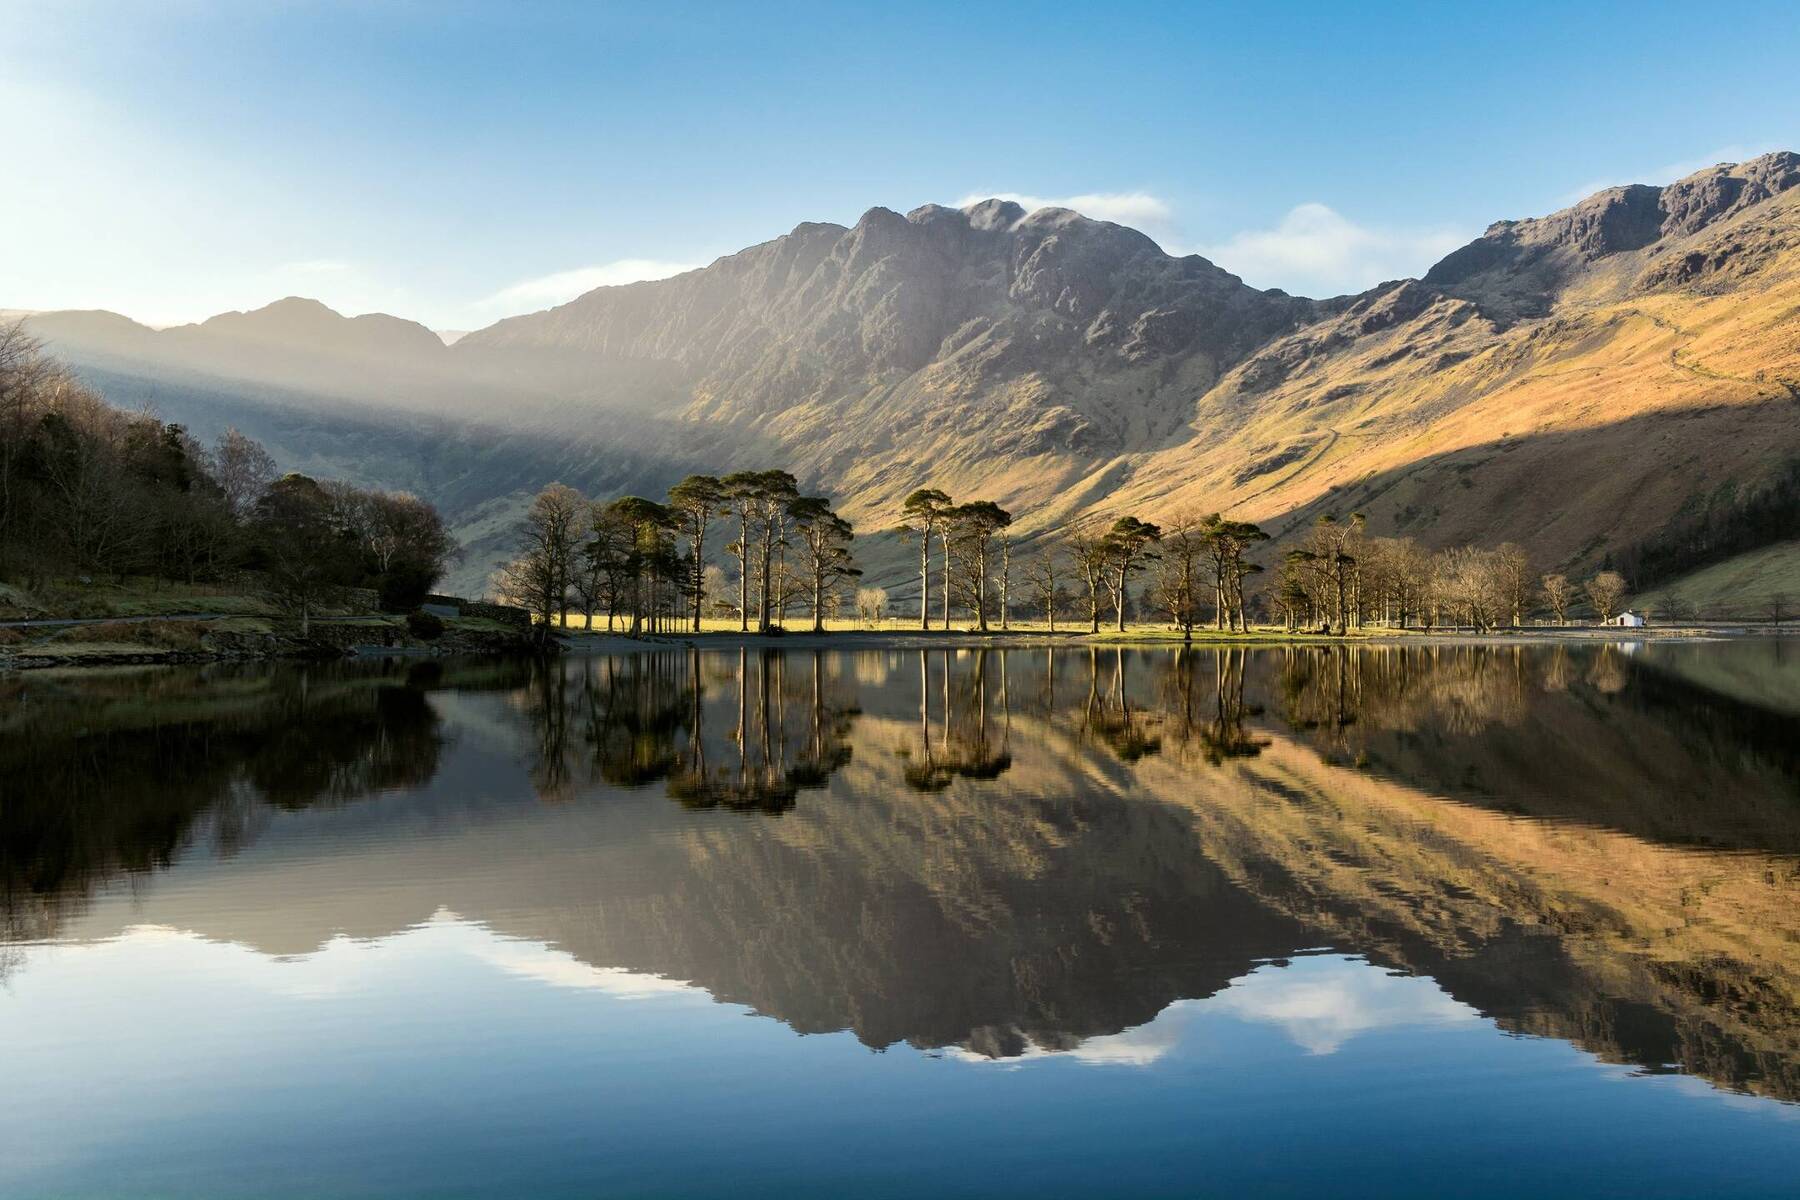 Winter staycations in the UK's Lake District